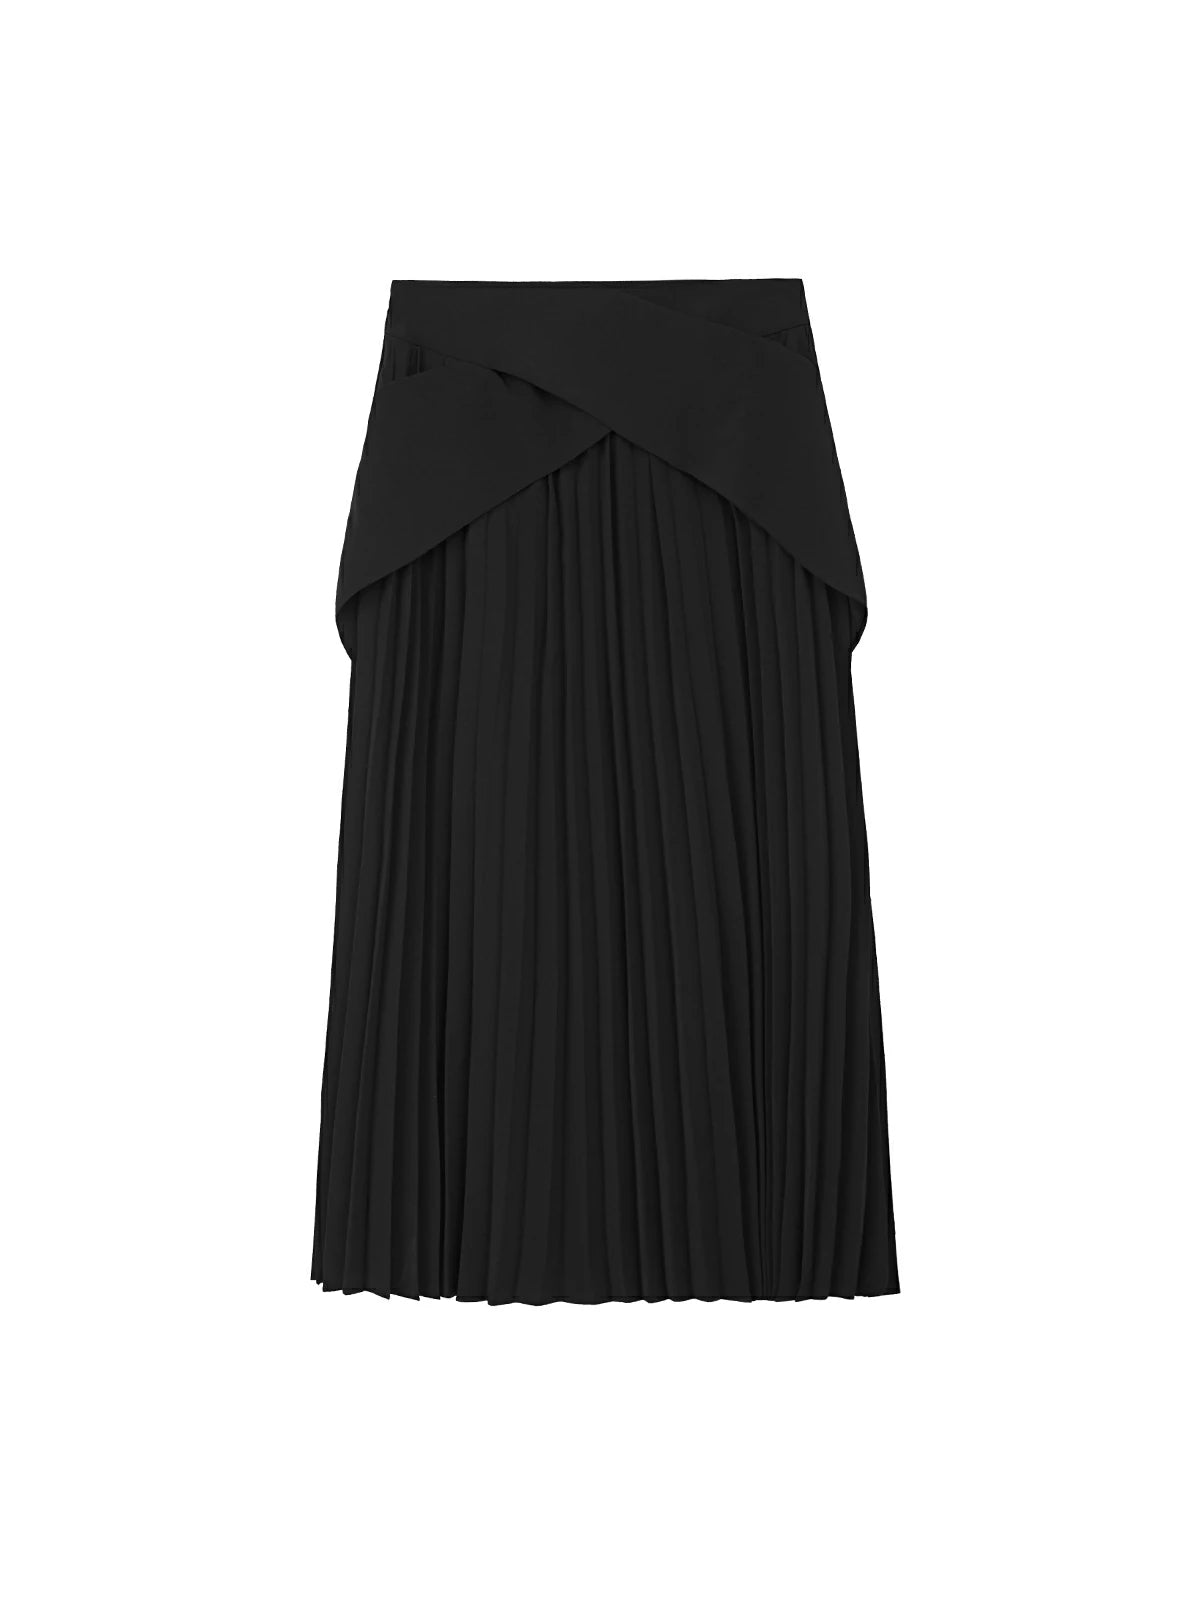 Pleated midi skirt combining modern elements with timeless elegance